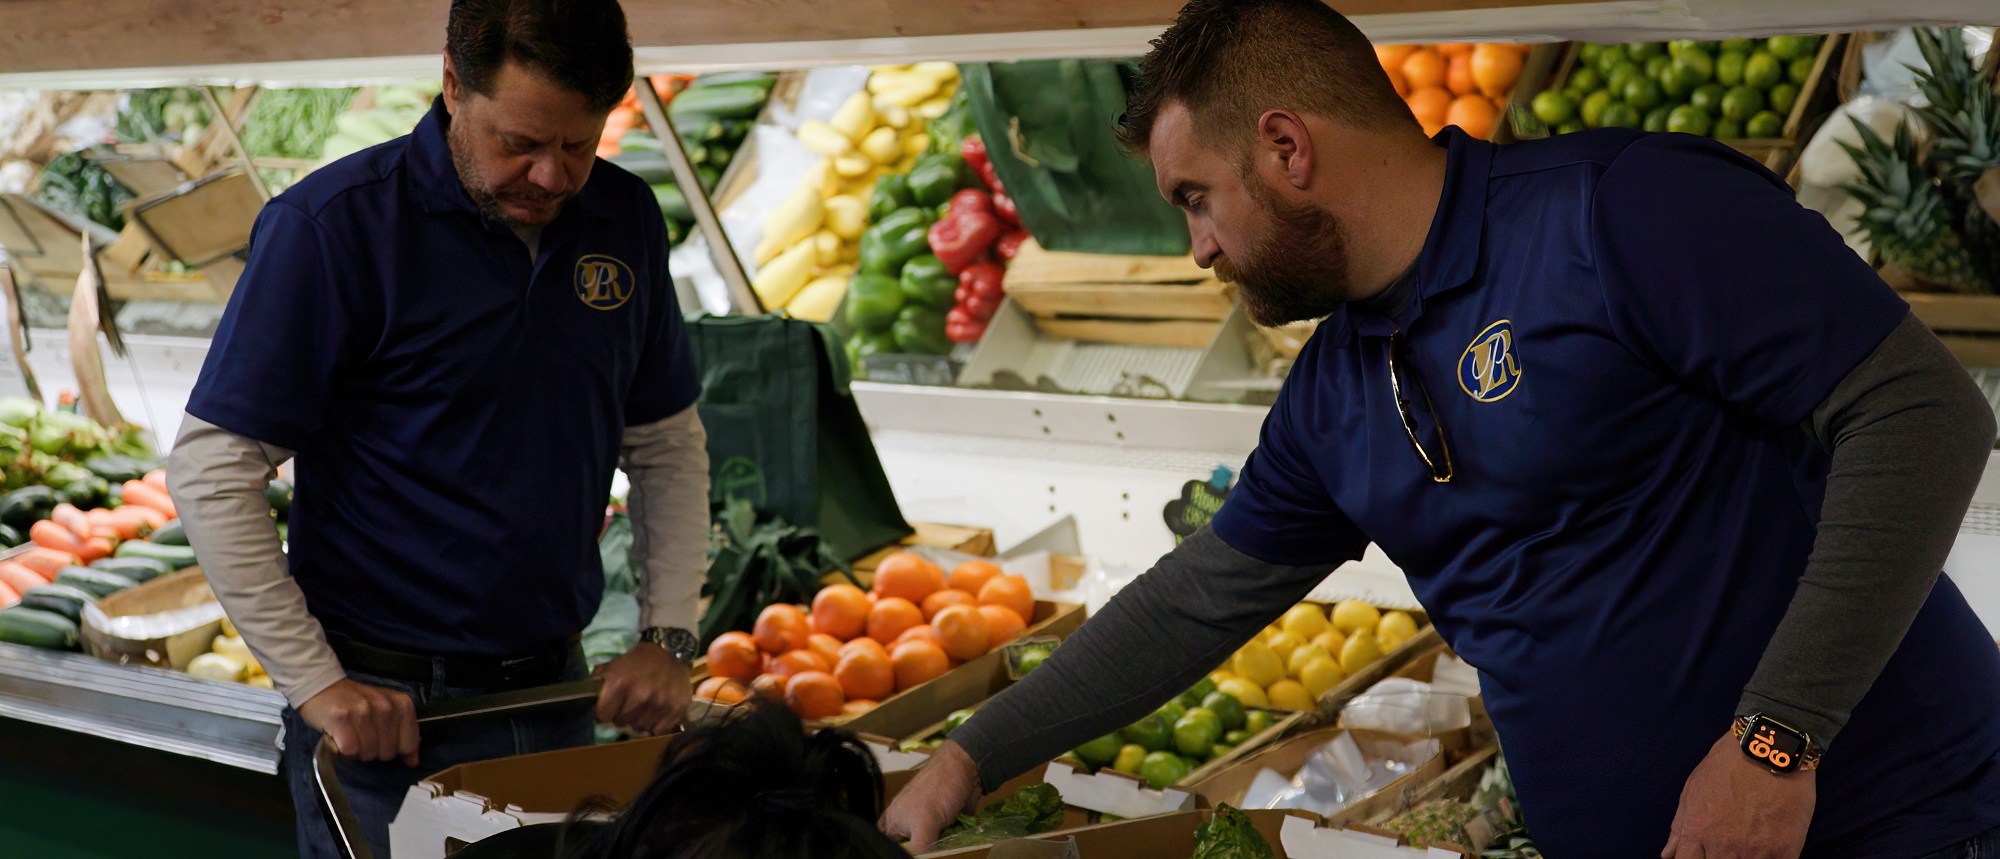 Two men packing boxes with fresh produce